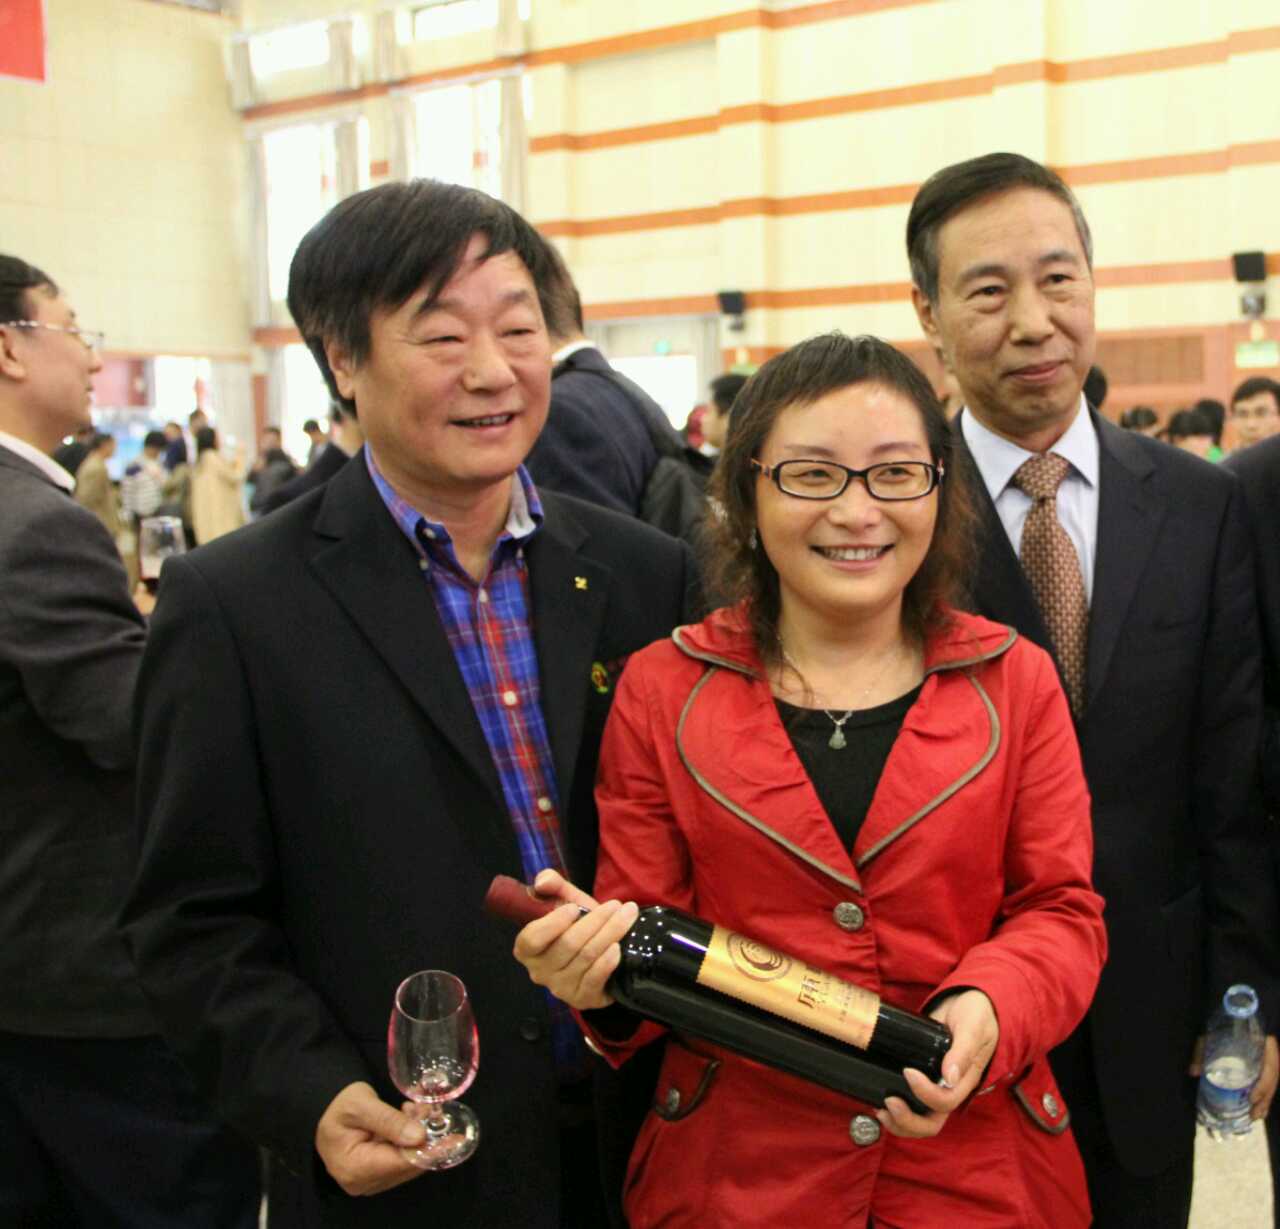 Ningxia Chateau Yuange Both Won Silver Awards on Decanter and Brussels Wine Competition 